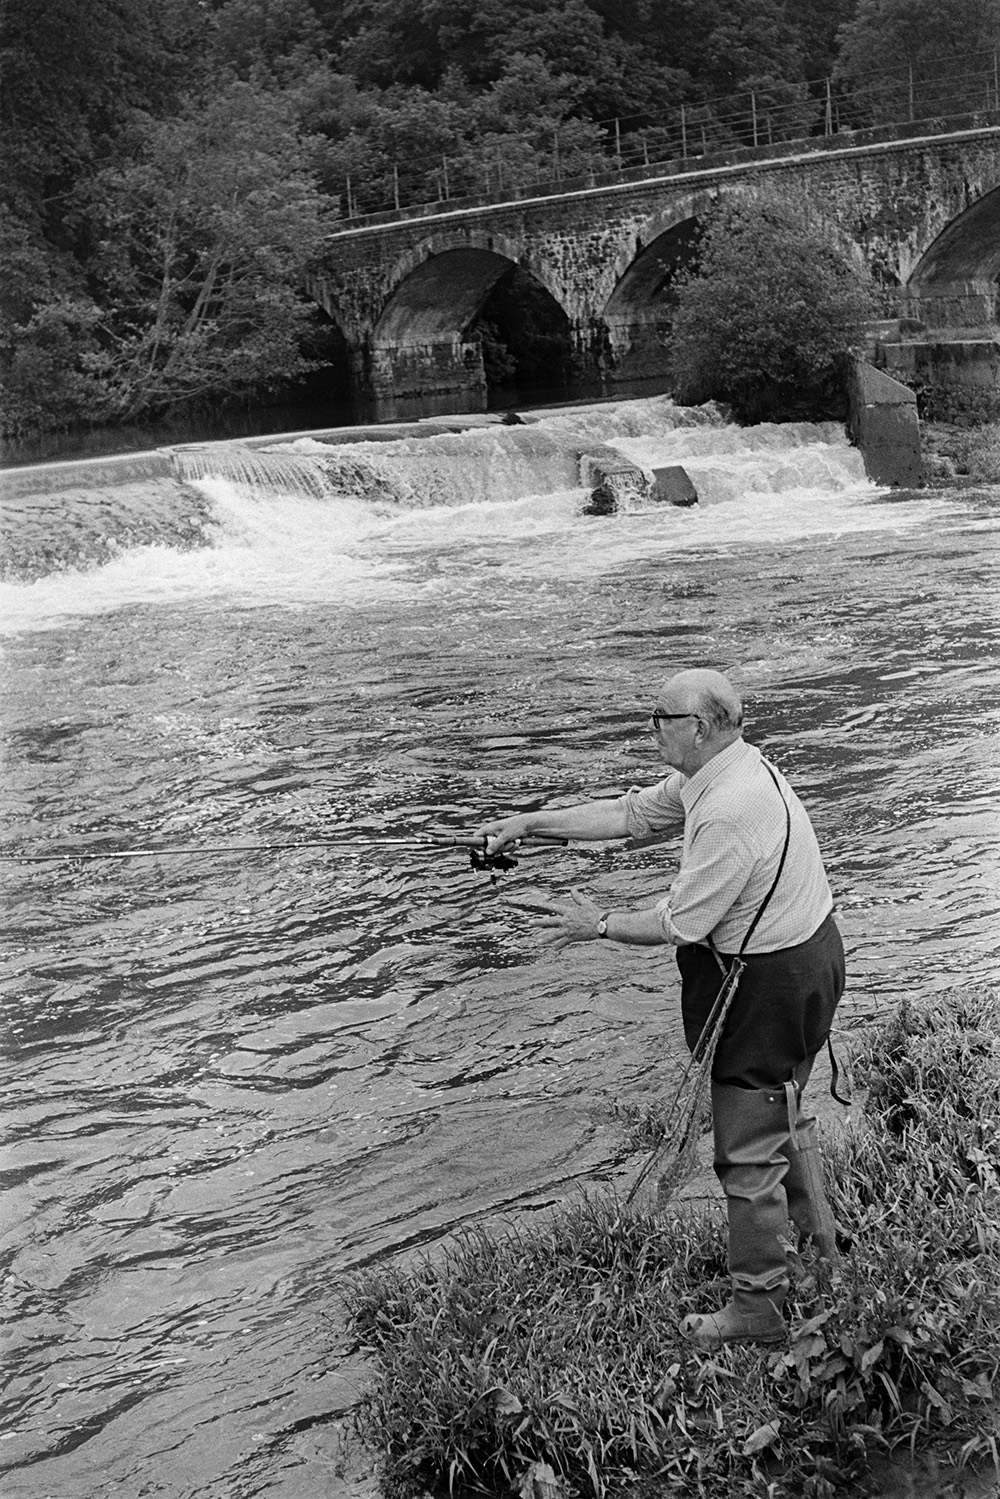 Dr J V Morris, OBE, fishing in the River Torridge on a fishing holiday at the Half Moon Inn, Sheepwash. He is wearing waders and is using a fishing rod. A weir and bridge over the river are visible in the background.